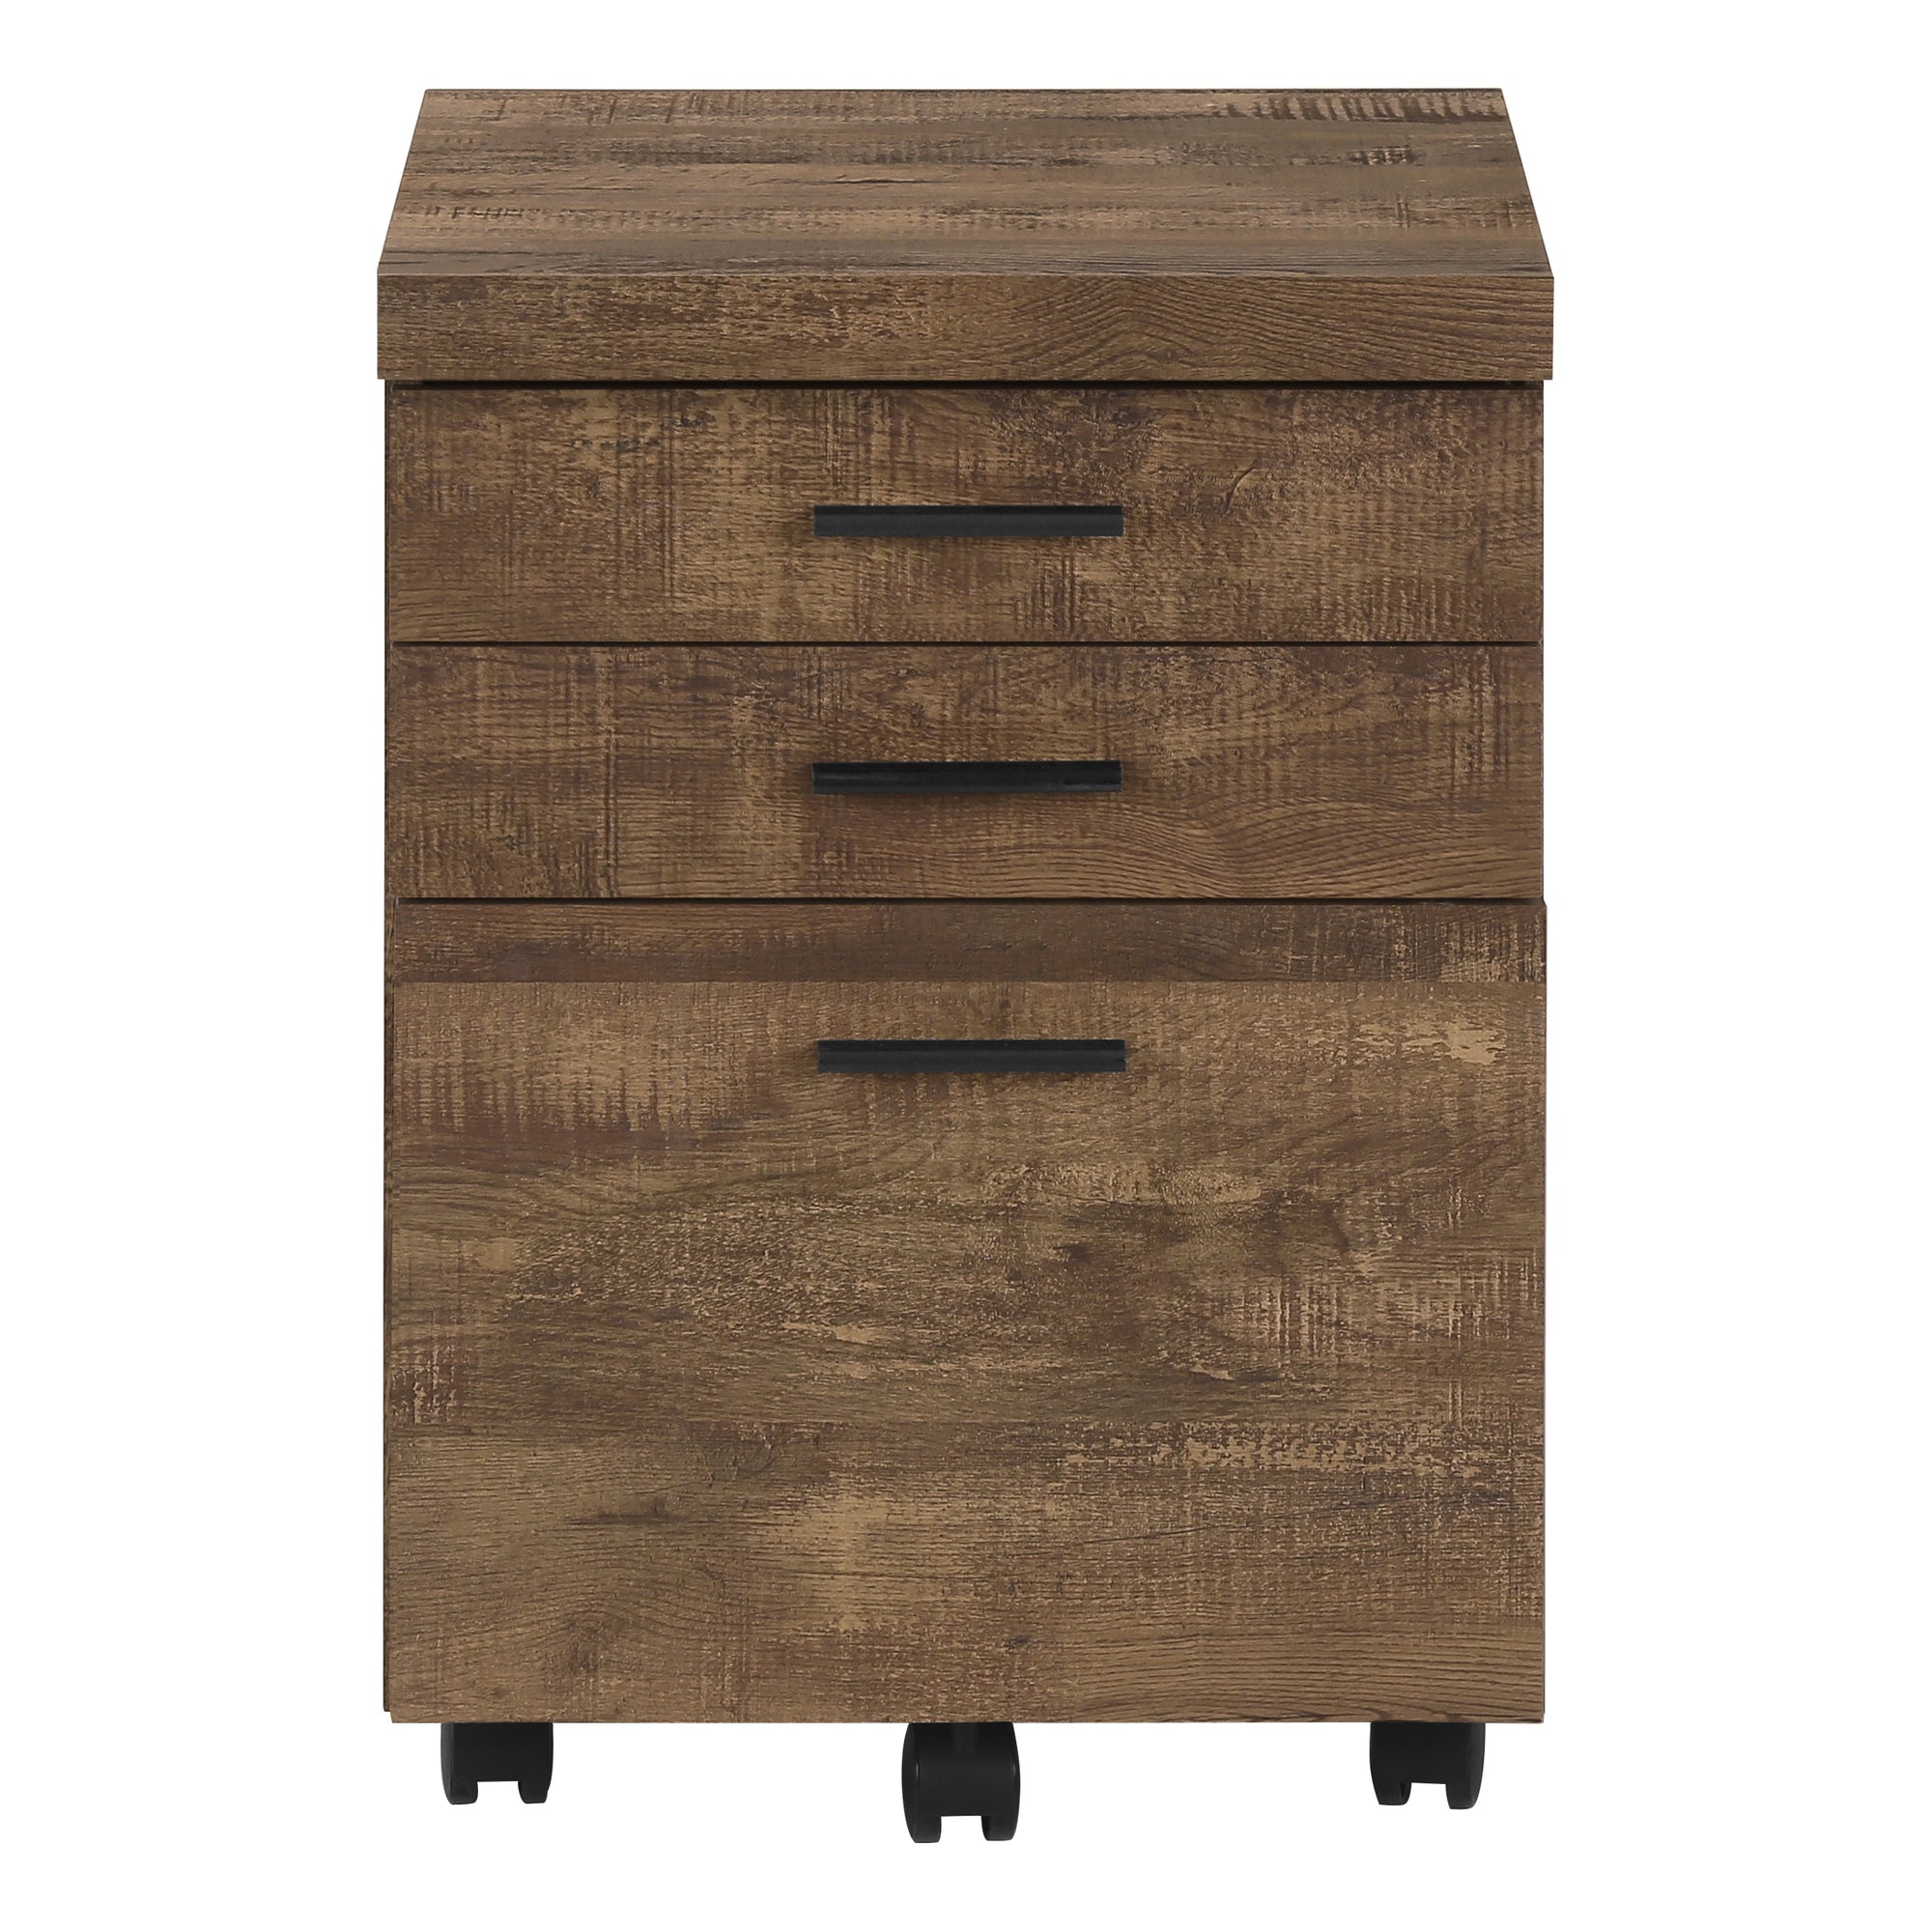 MN-667400    File Cabinet, Rolling Mobile, Storage, Printer Stand, Wood File Cabinet, Office, Mdf, Brown Reclaimed Wood Look, Contemporary, Modern